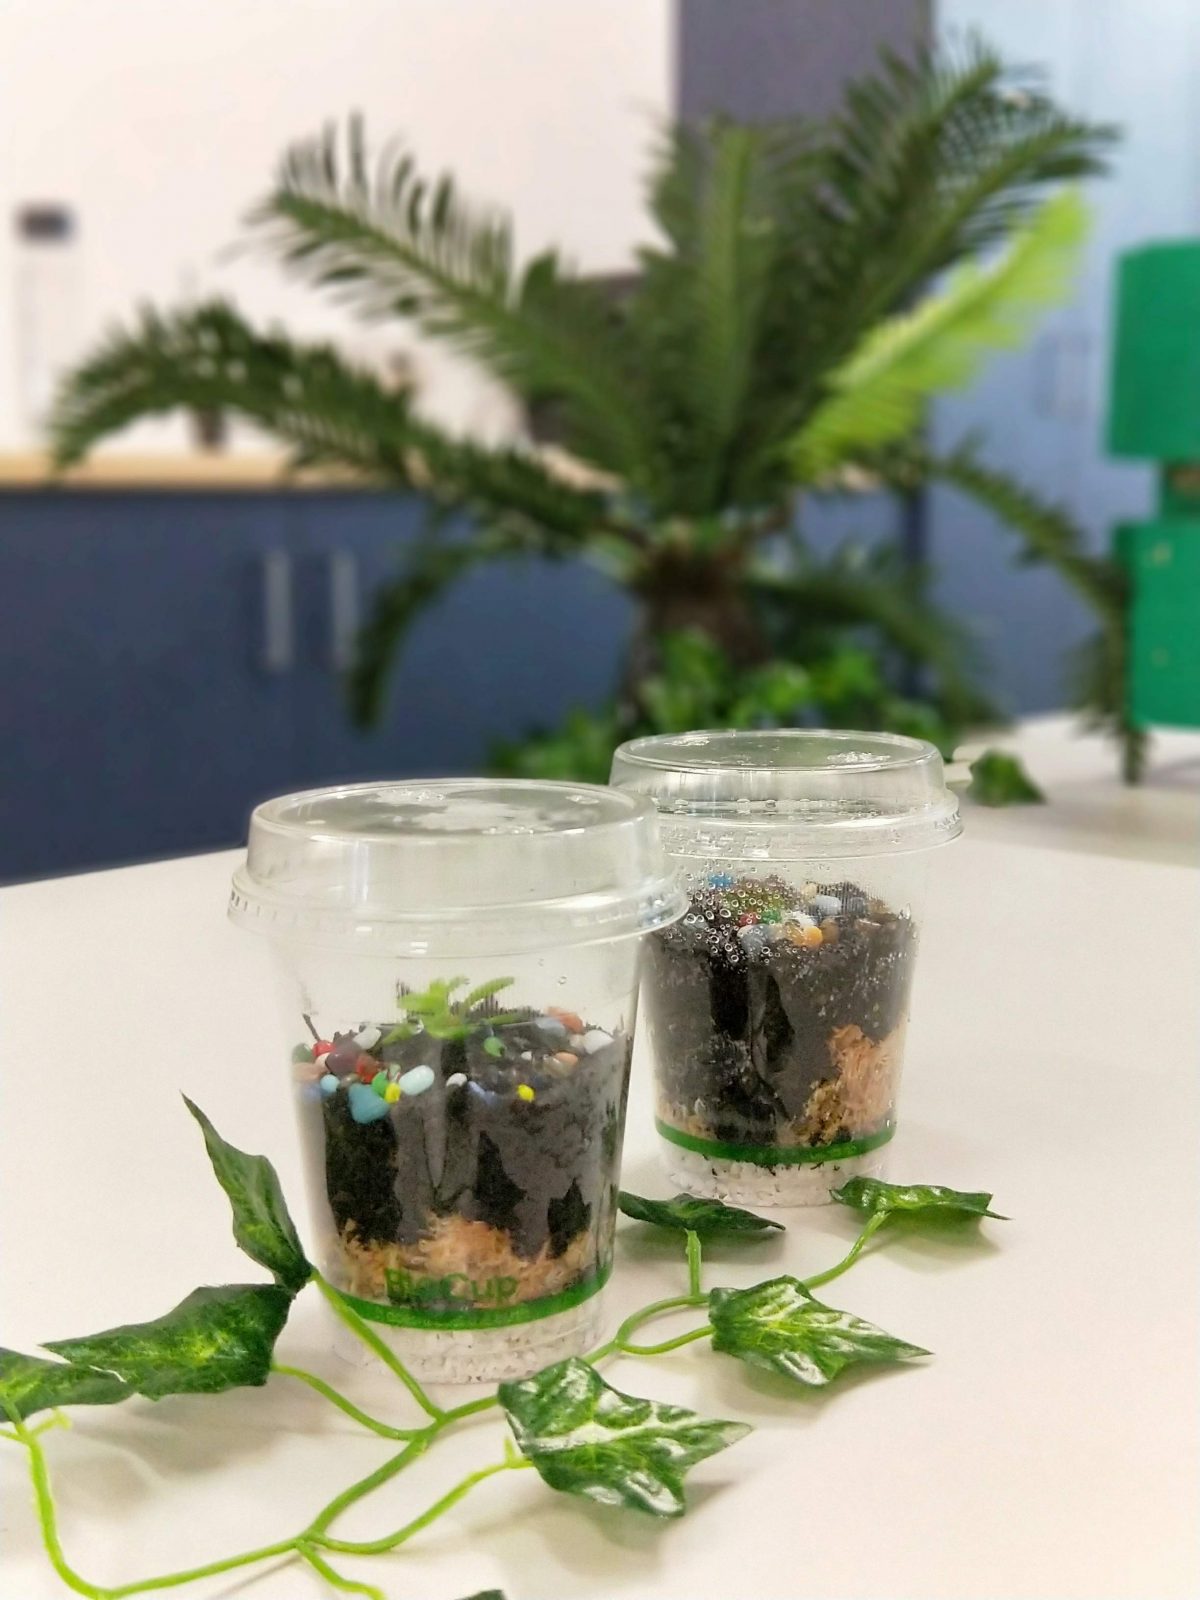 How To Build Your Own Ecosystem – Backyard Science at Science Space Wollongong